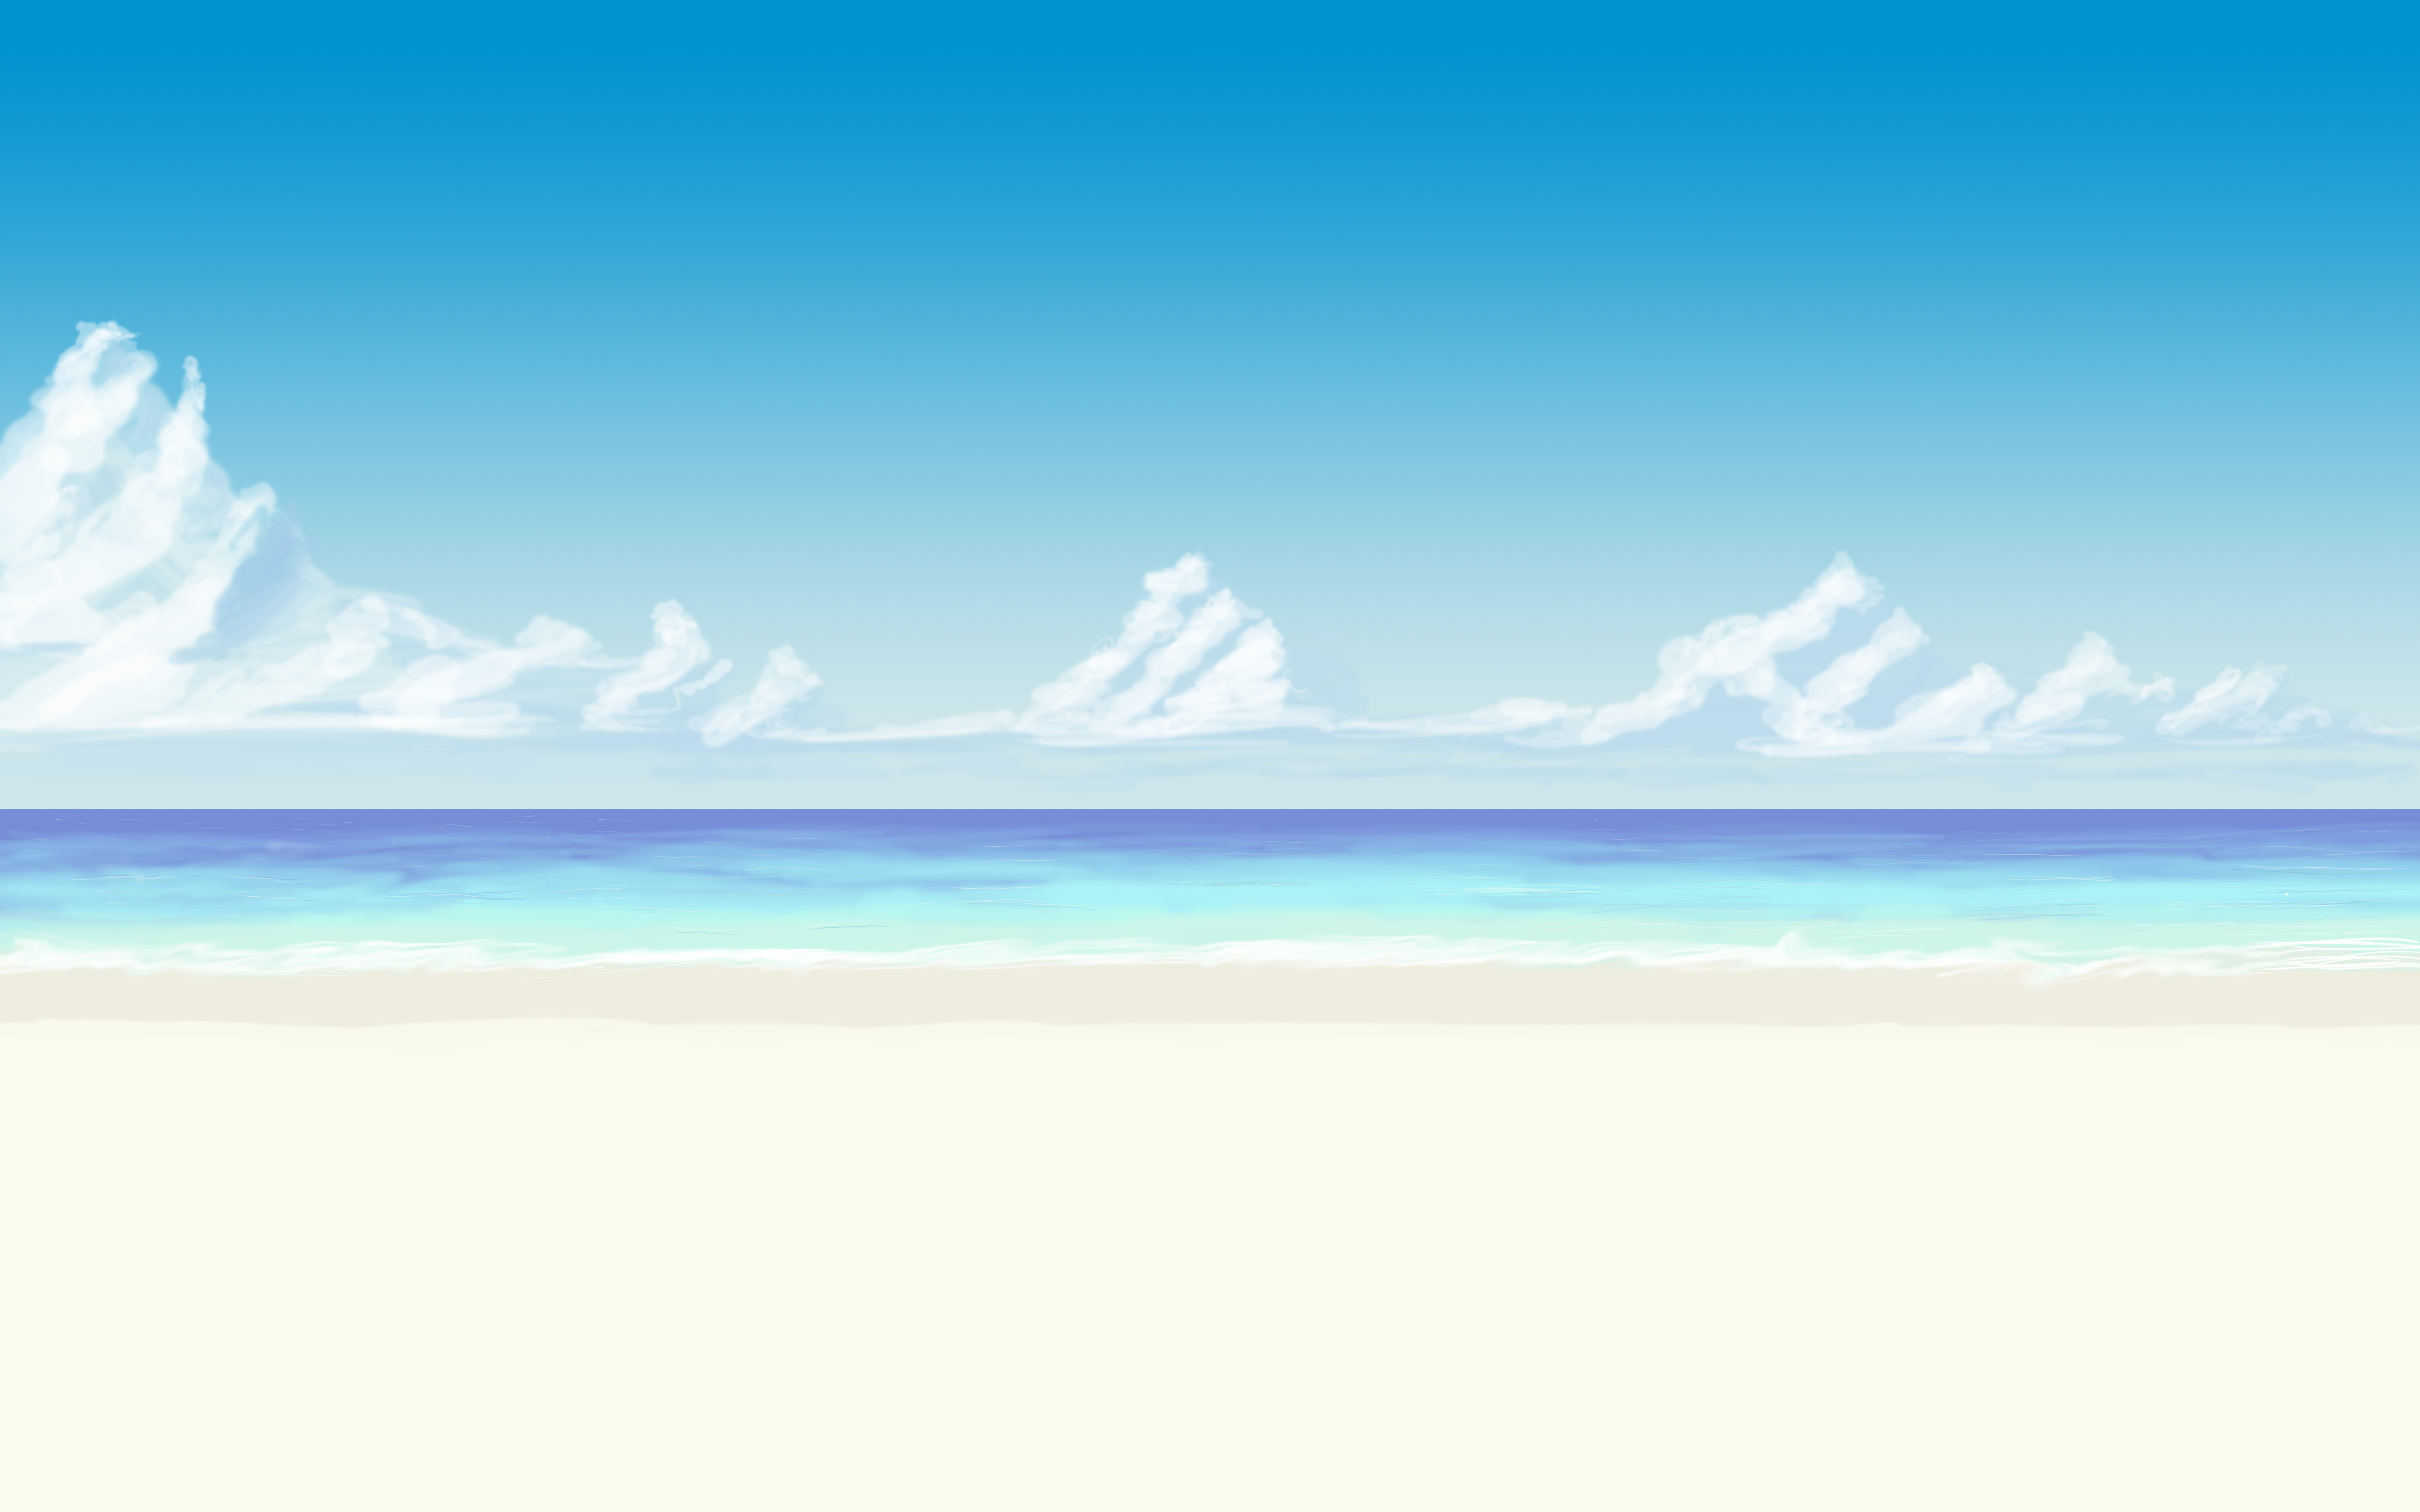 Paintings Landscapes Scenery Here S A Beach Background That Works Well